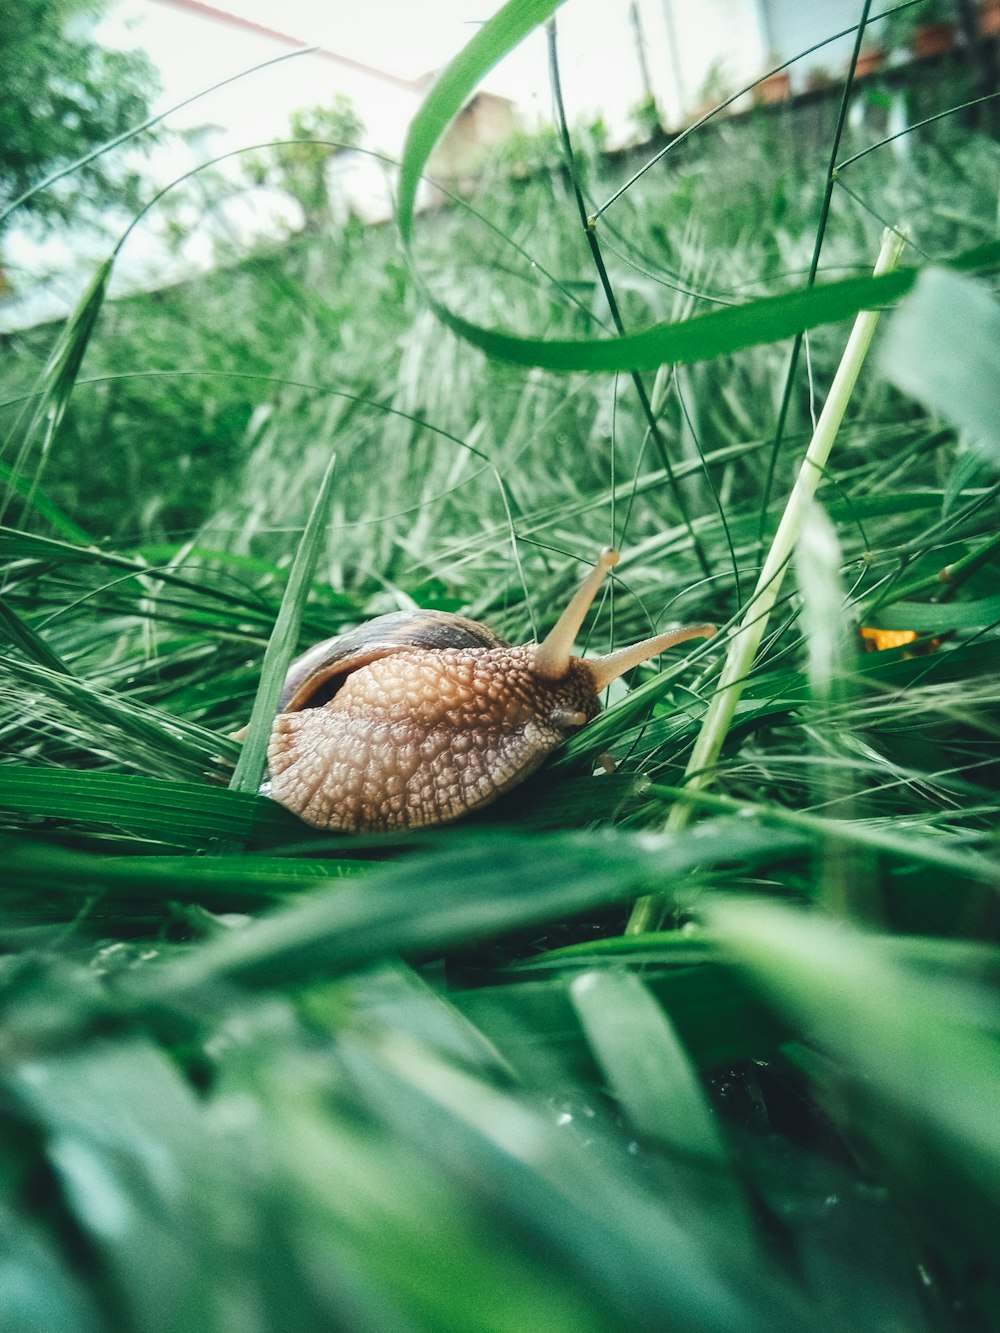 brown and beige snail on green grass